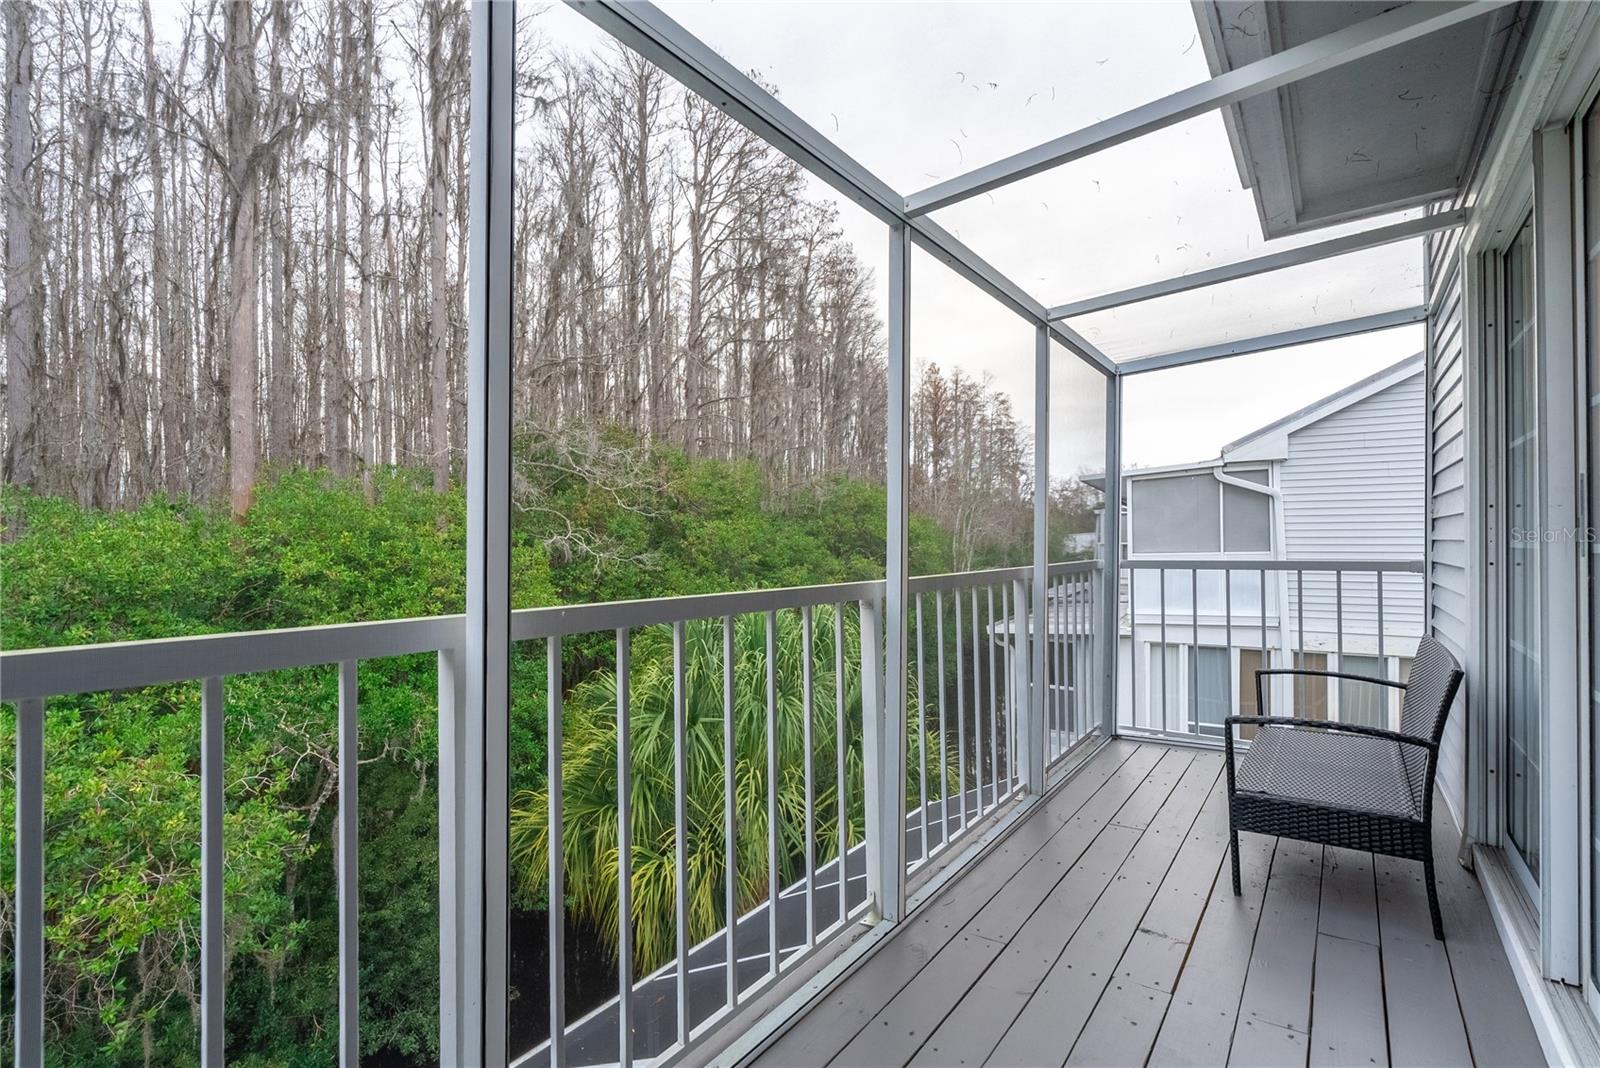 Stunning view outside the screened living room deck provides tranquil opportunities to watch the birds of Florida and birds that migrate here in the winter.